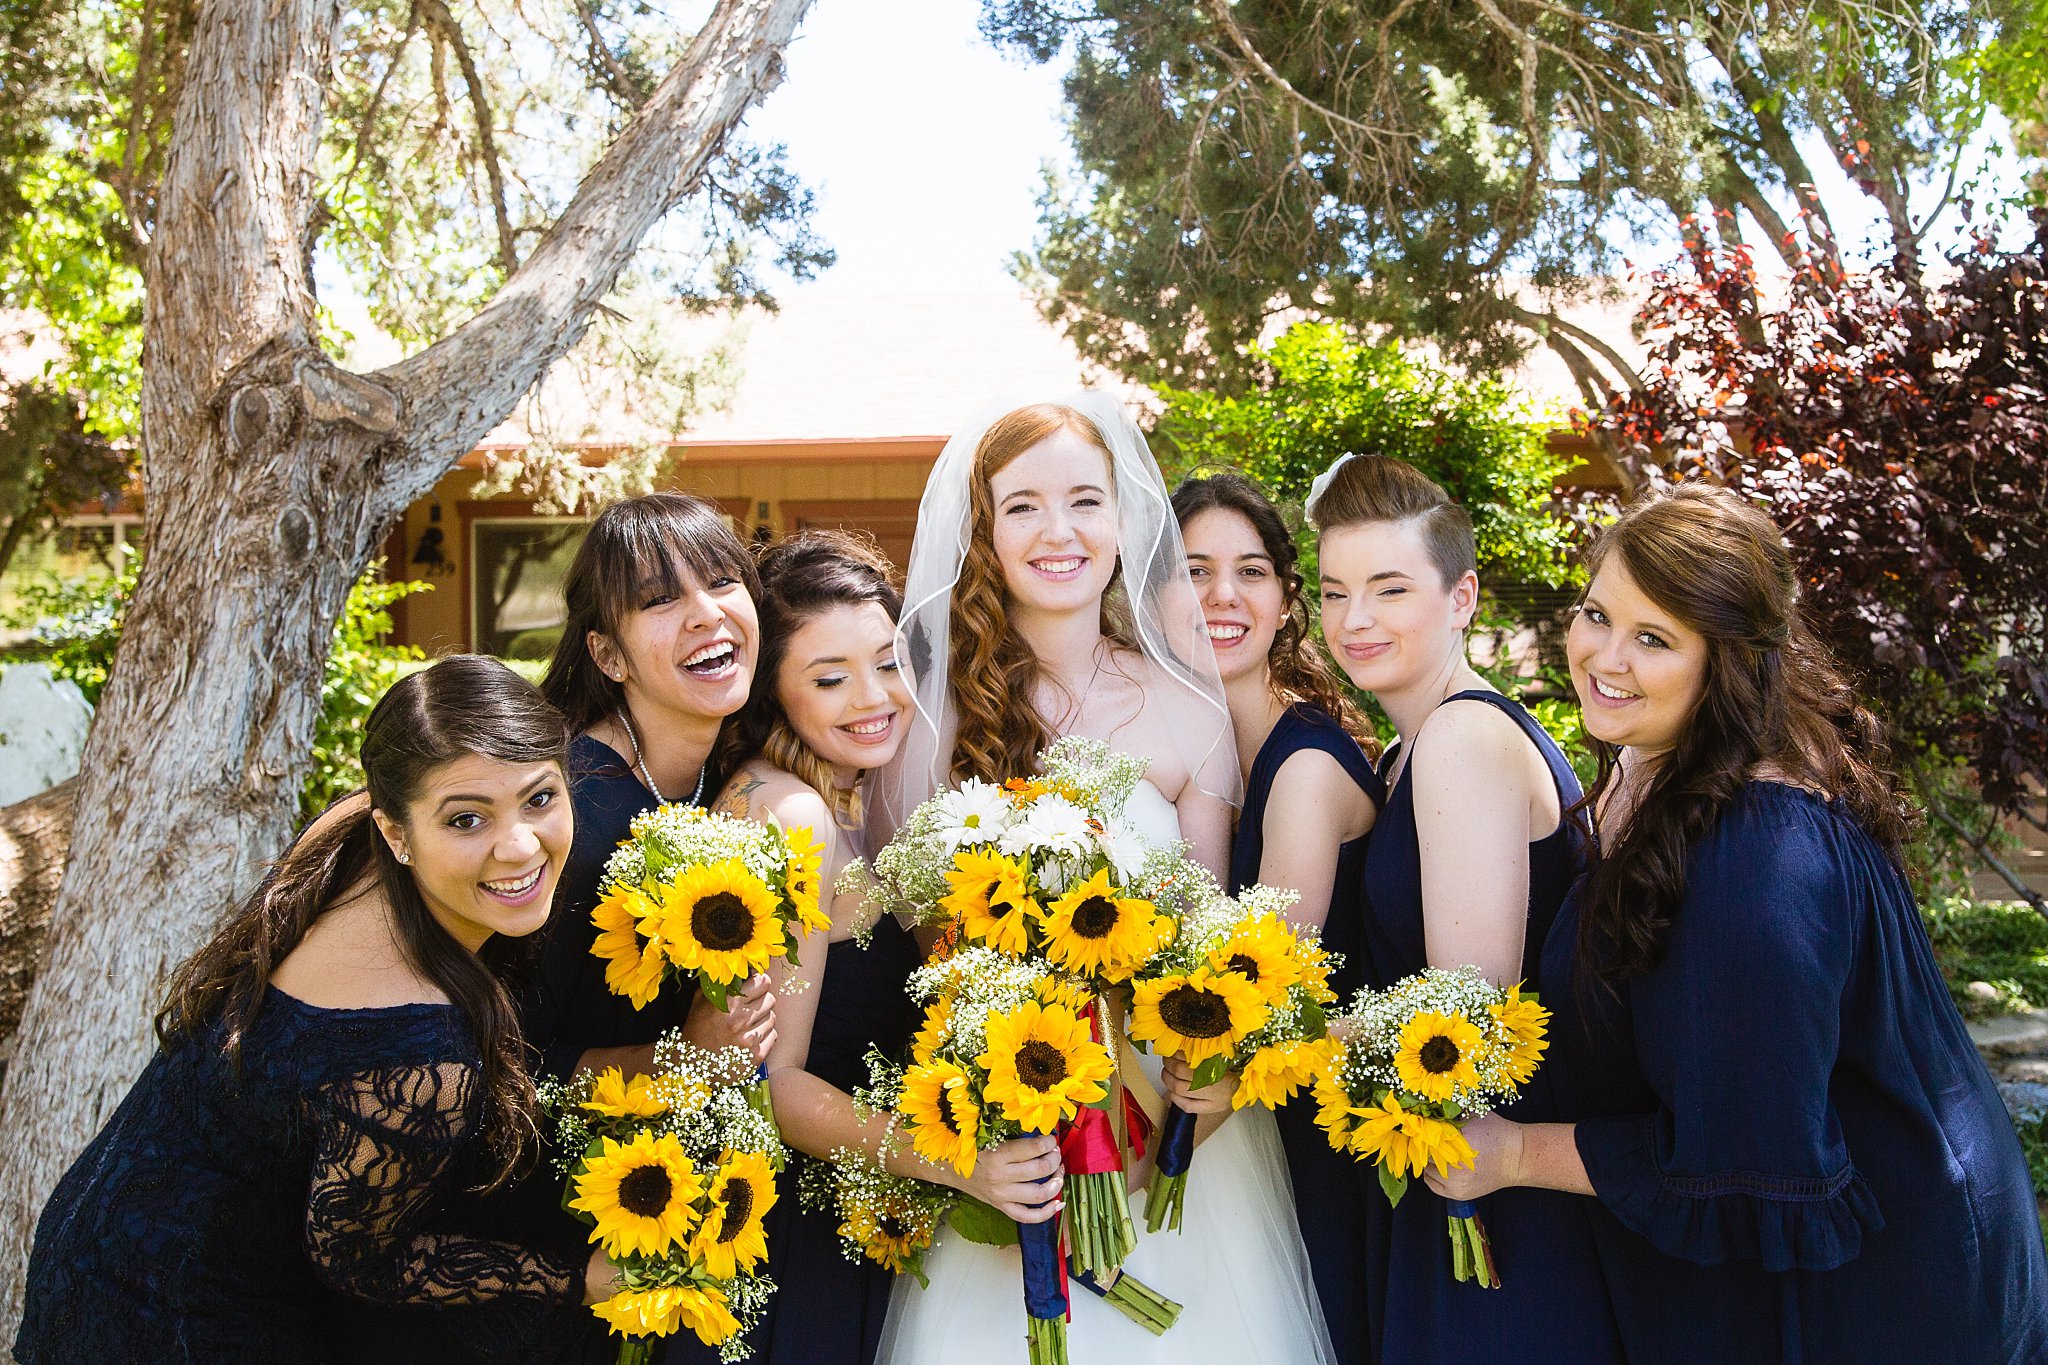 Bride and bridesmaids together at a Sky Ranch Lodge wedding by Arizona wedding photographer PMA Photography.